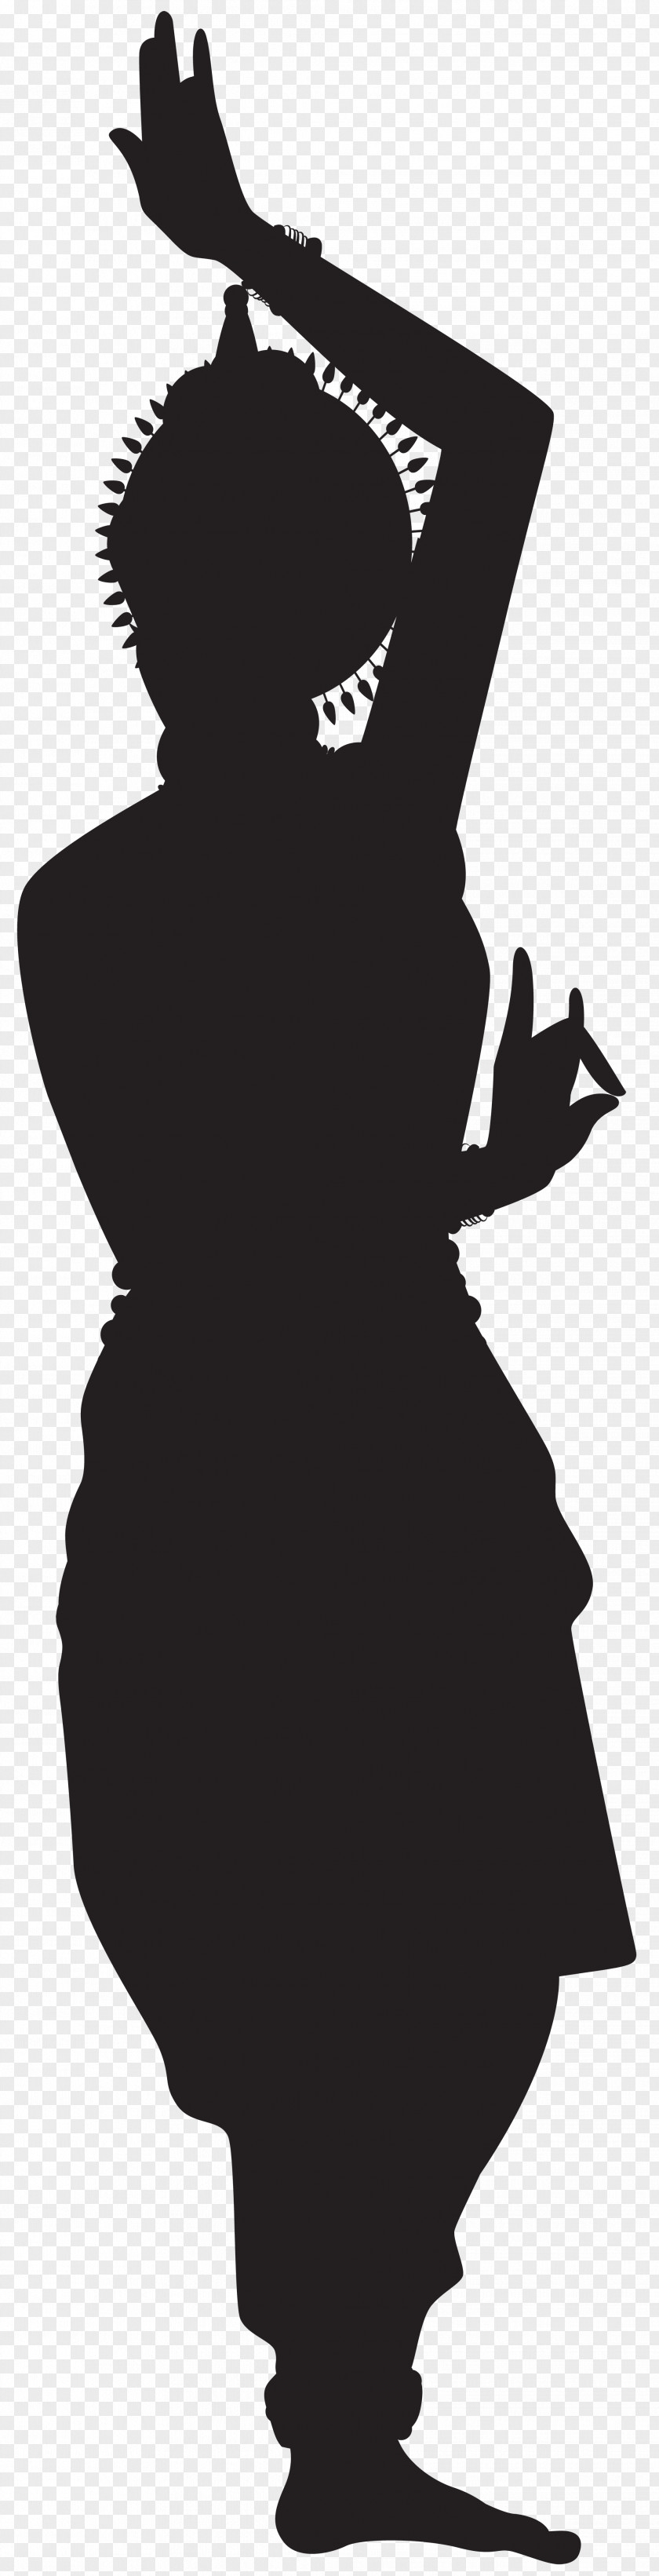 Silhouette Black And White Dance Clip Art PNG